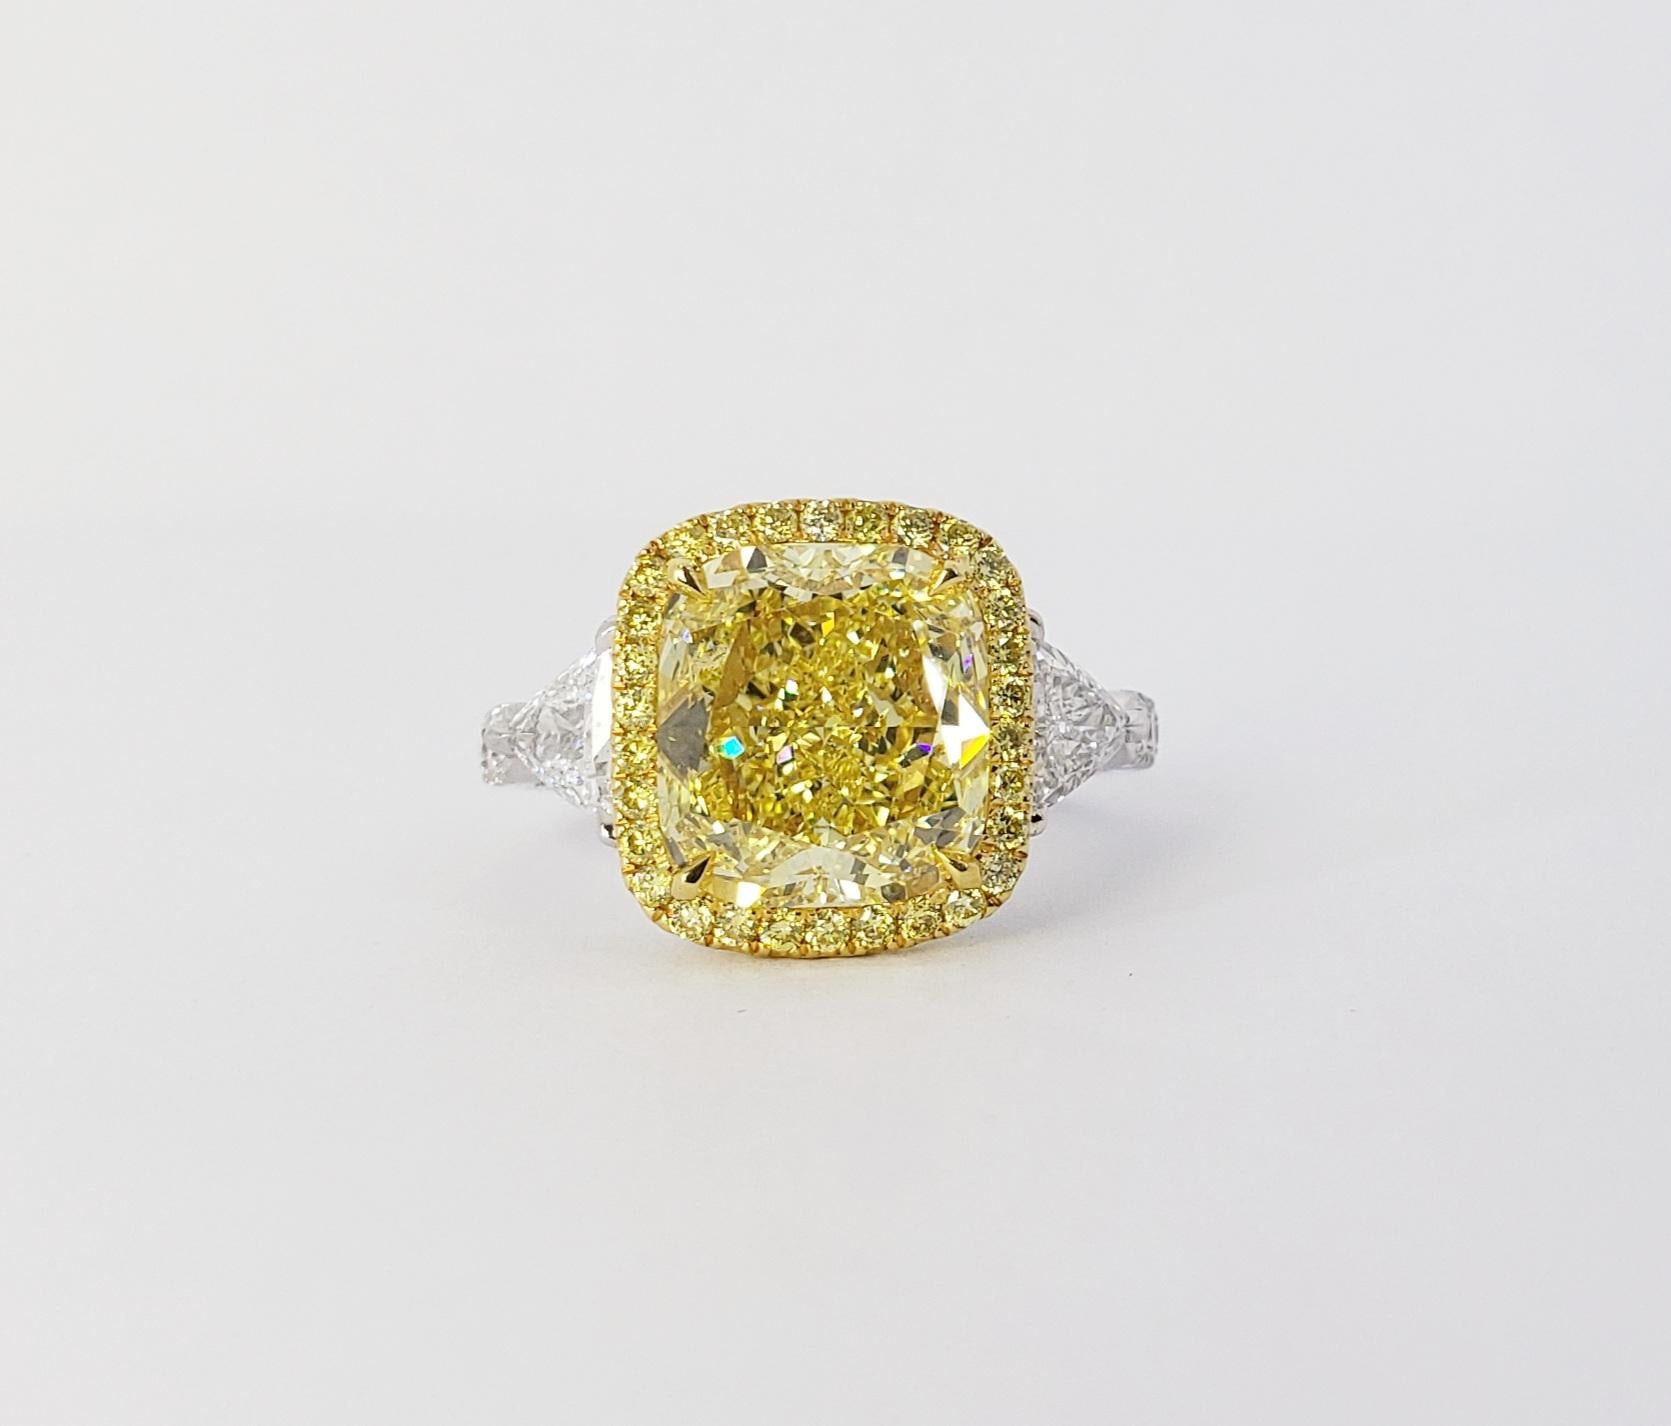 Rosenberg Diamonds & Co. 4.03 carat Cushion Cut Fancy Intense Yellow VVS2 clarity is accompanied by a GIA certificate. This beautiful bright cushion cut is set in a handmade 18k white gold setting with perfectly matched pair of trillion side stones